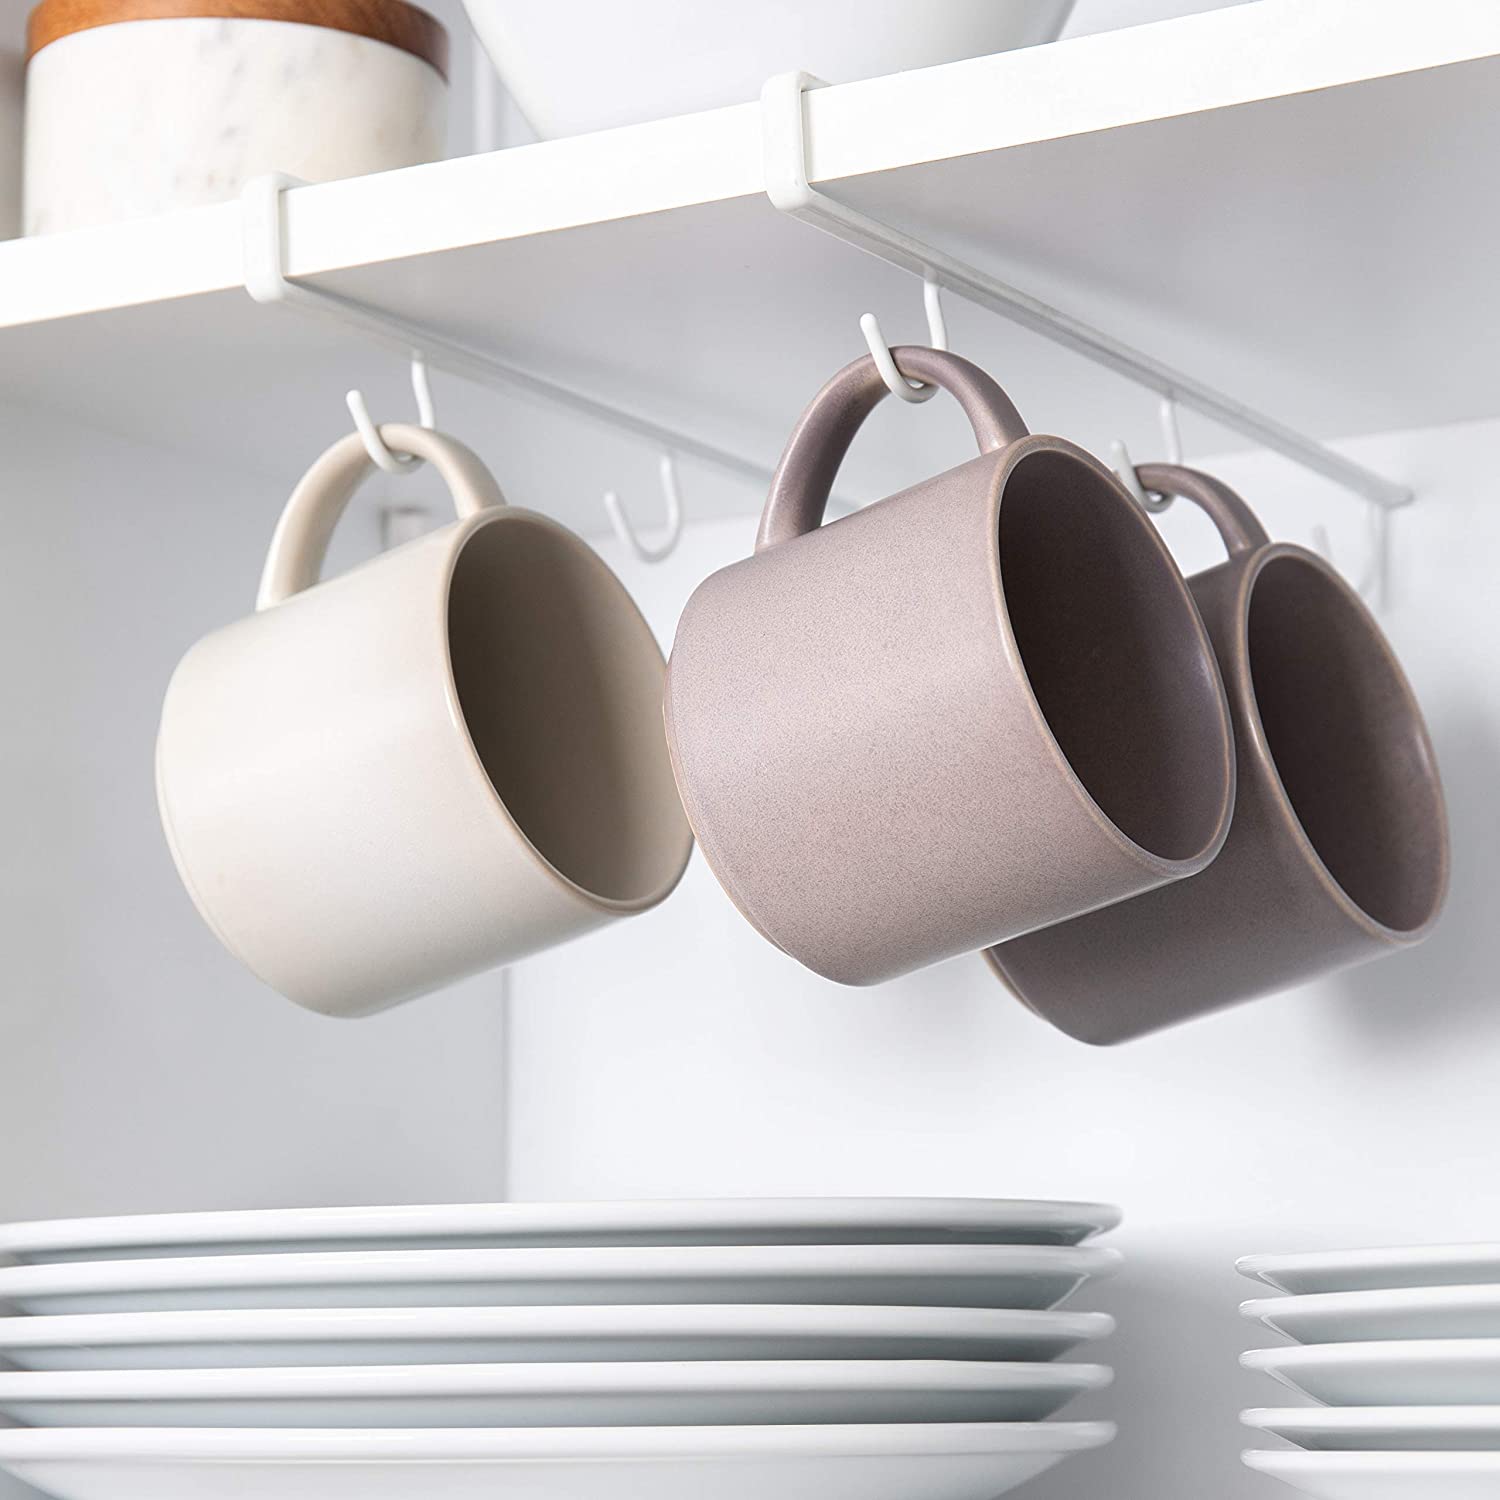 Items to Invest in to Save Space in Your Kitchen